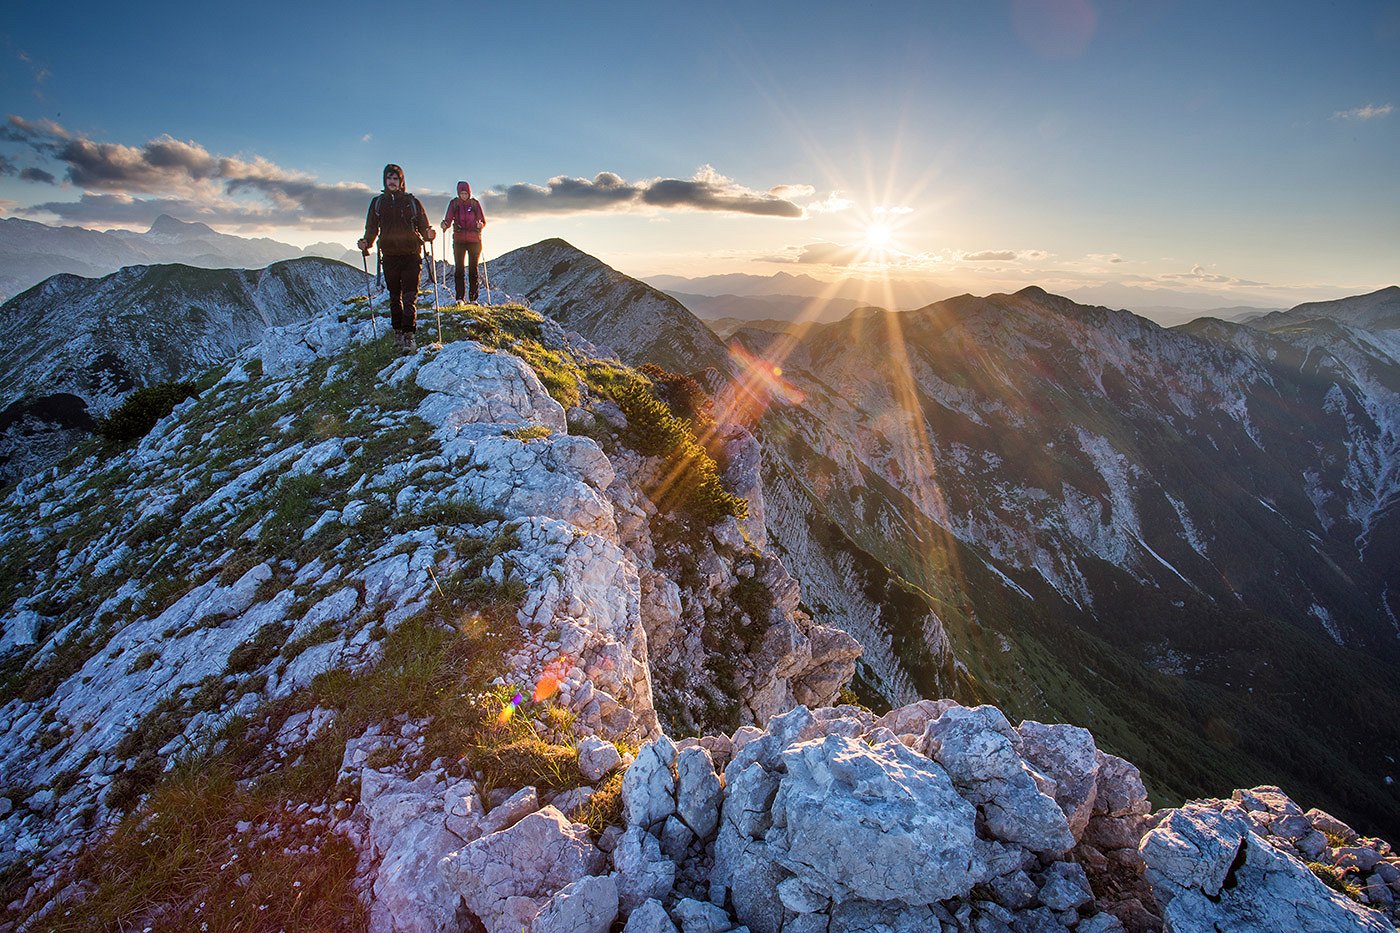 Hikers enjoy the sunrise in the mountains